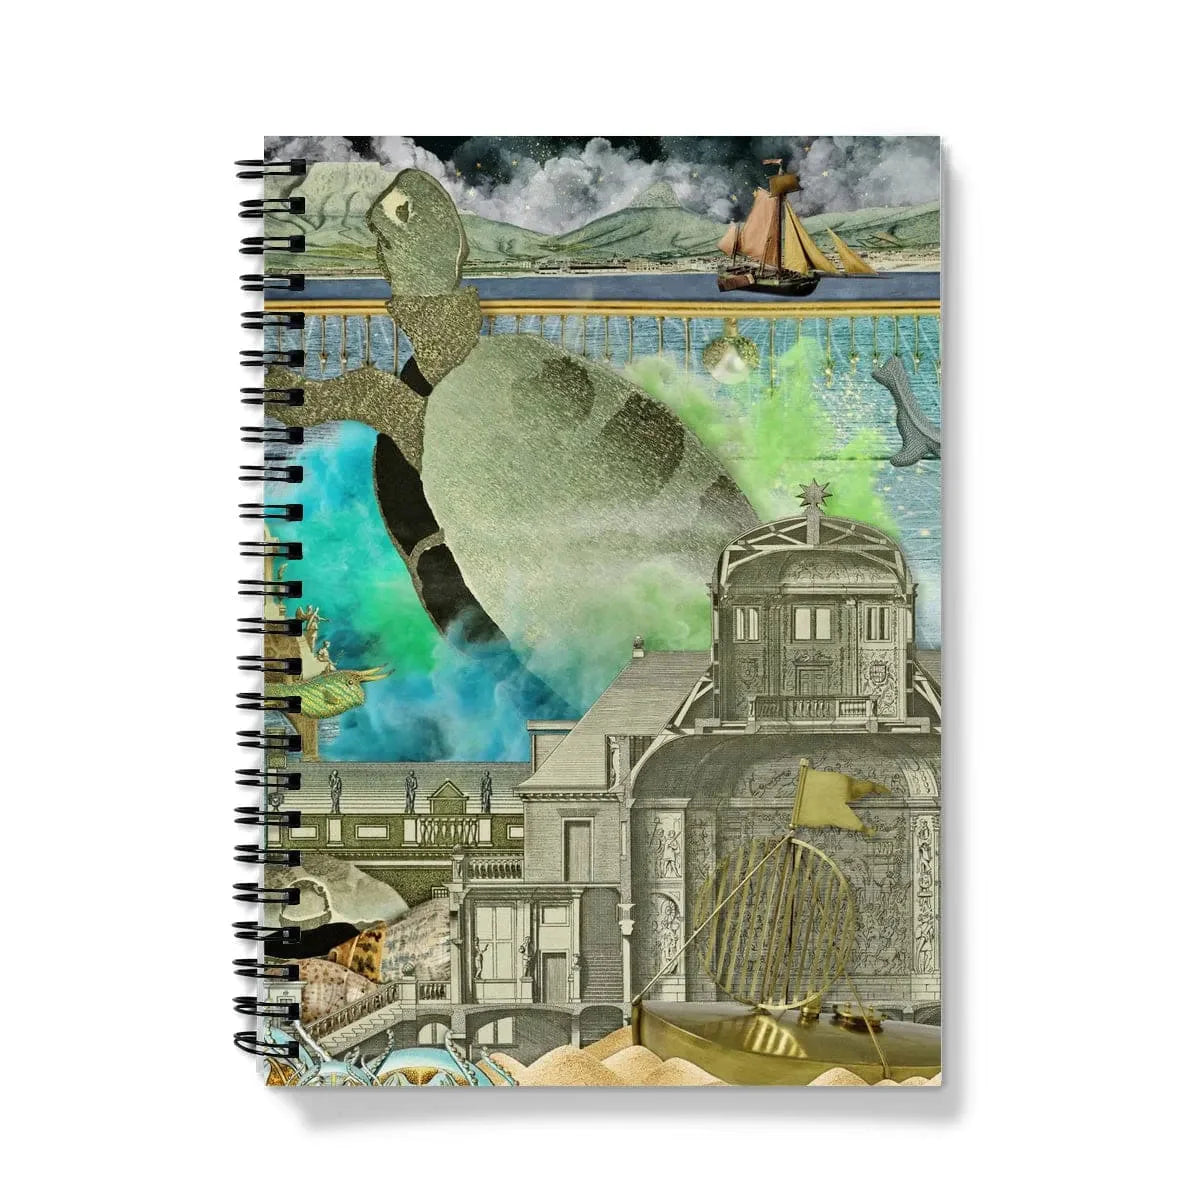 Down Where It’s Wetter Part 3 Notebook - A5 - Graph Paper - Notebooks & Notepads - Aesthetic Art